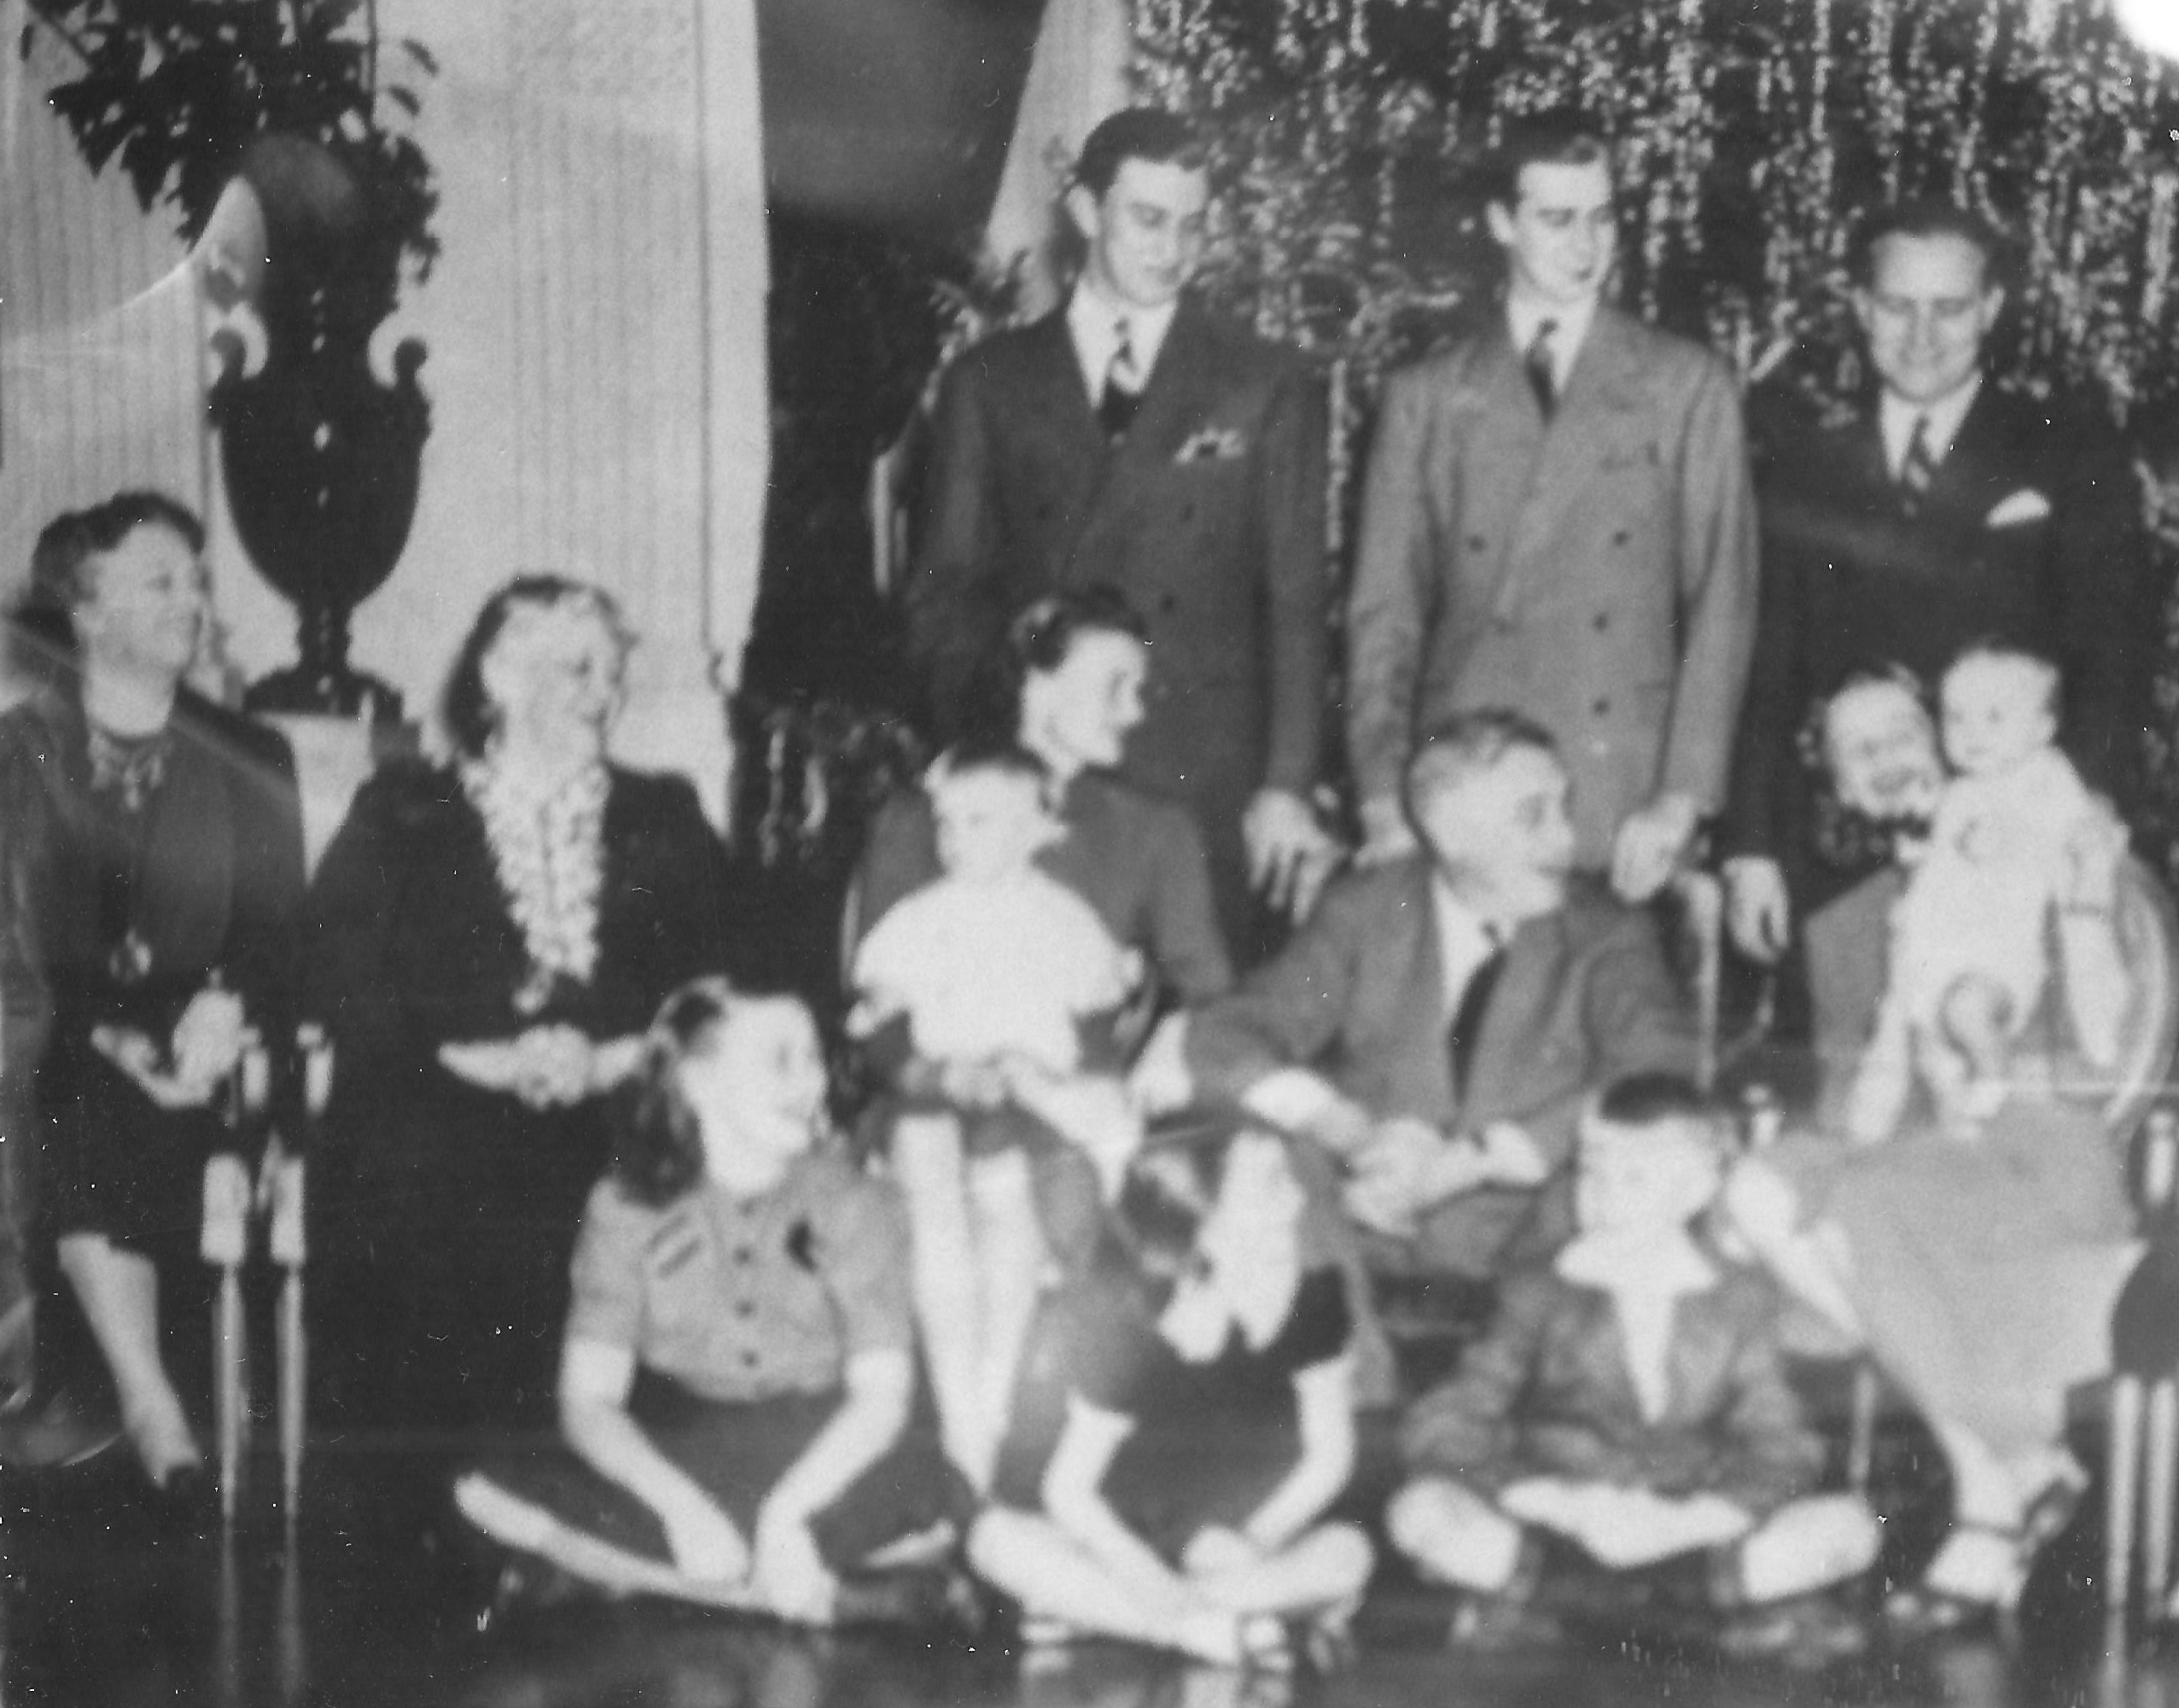 The FDR family during Christmas 1939 in the East Room, the President's wife and mother at far left, his daughter at far right and grandchildren all over.